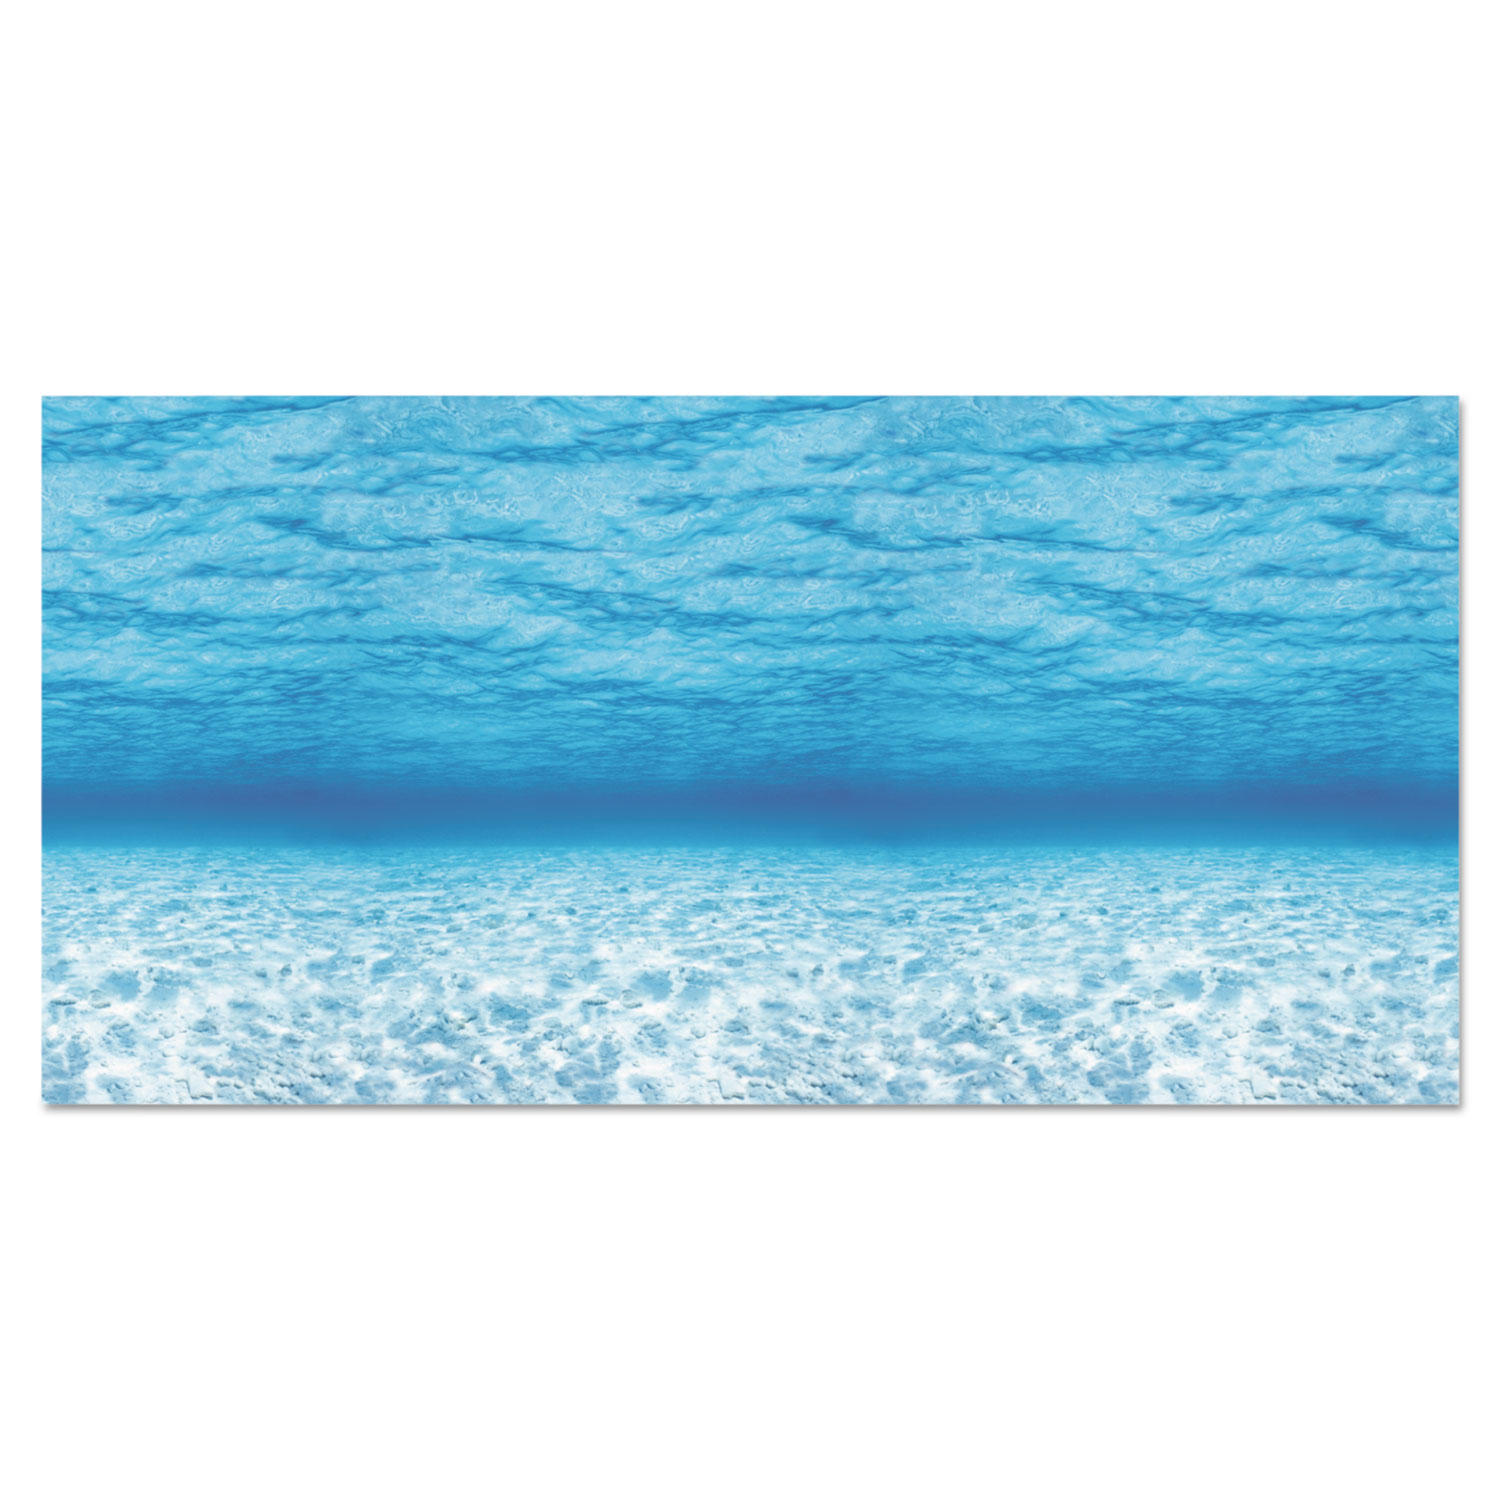  Pacon 56525 Fadeless Designs Bulletin Board Paper, Under the Sea, 48 x 50 ft. (PAC56525) 